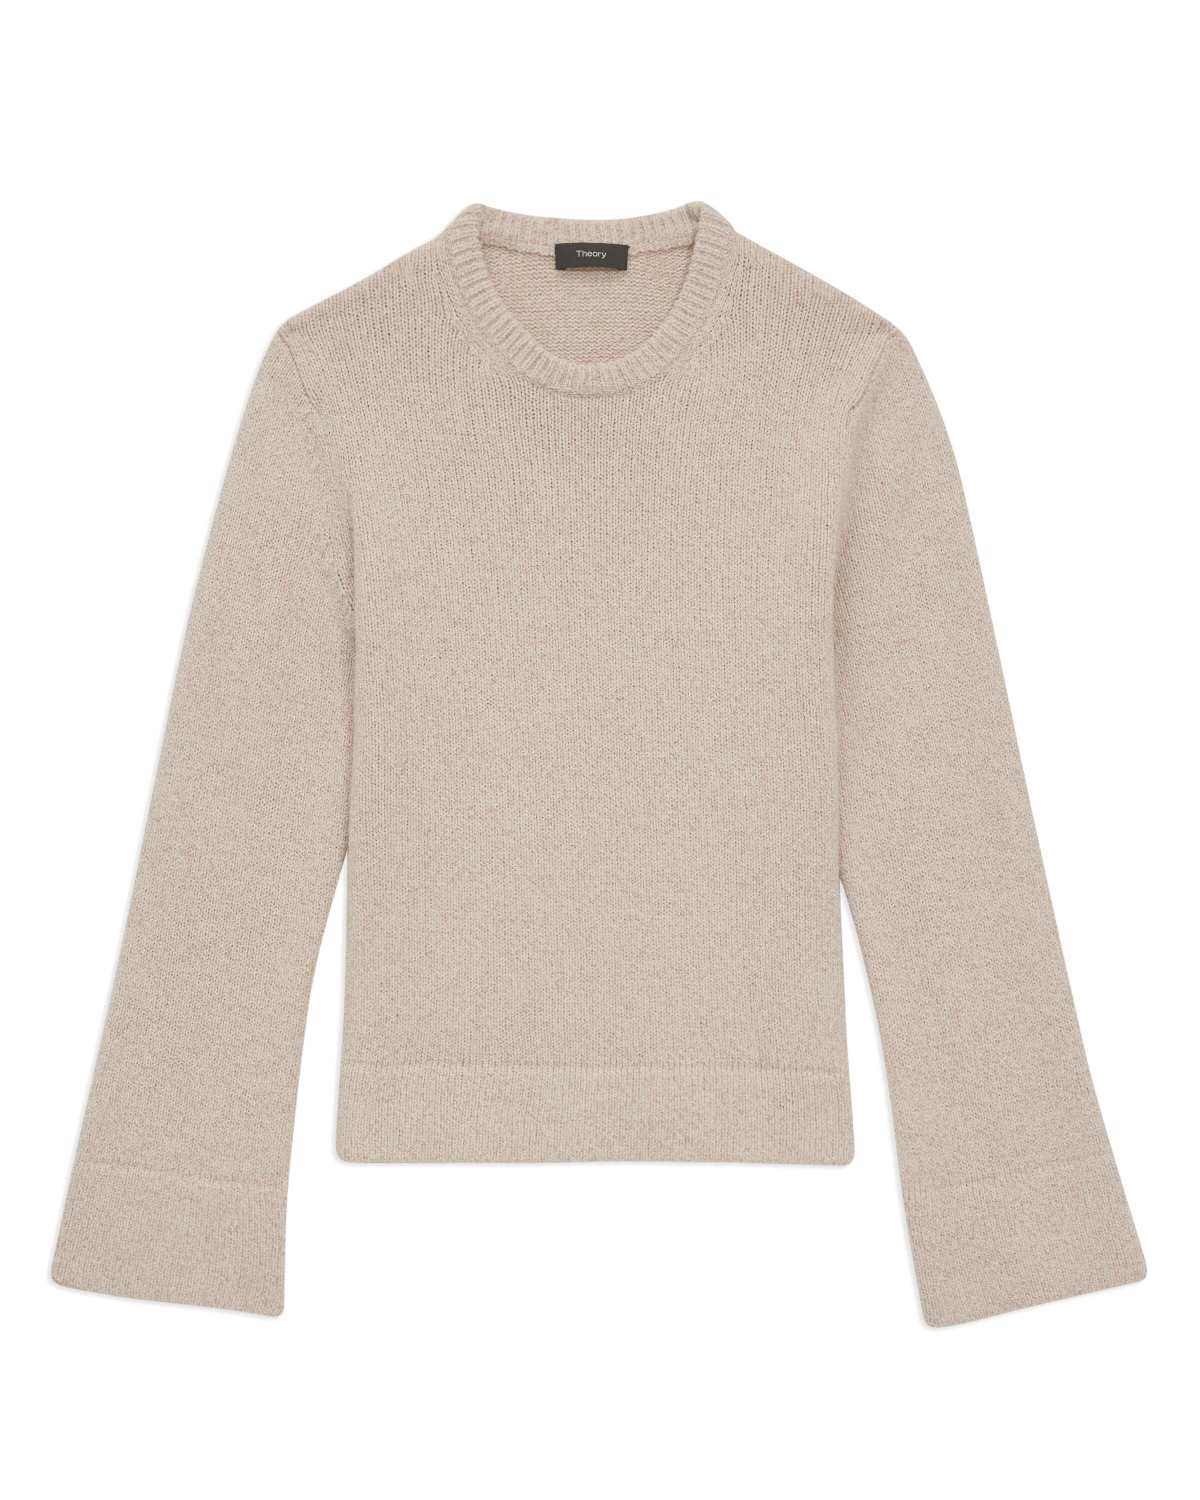 Theory Slit Crewneck Sweater in Wool-Cashmere Bouclé